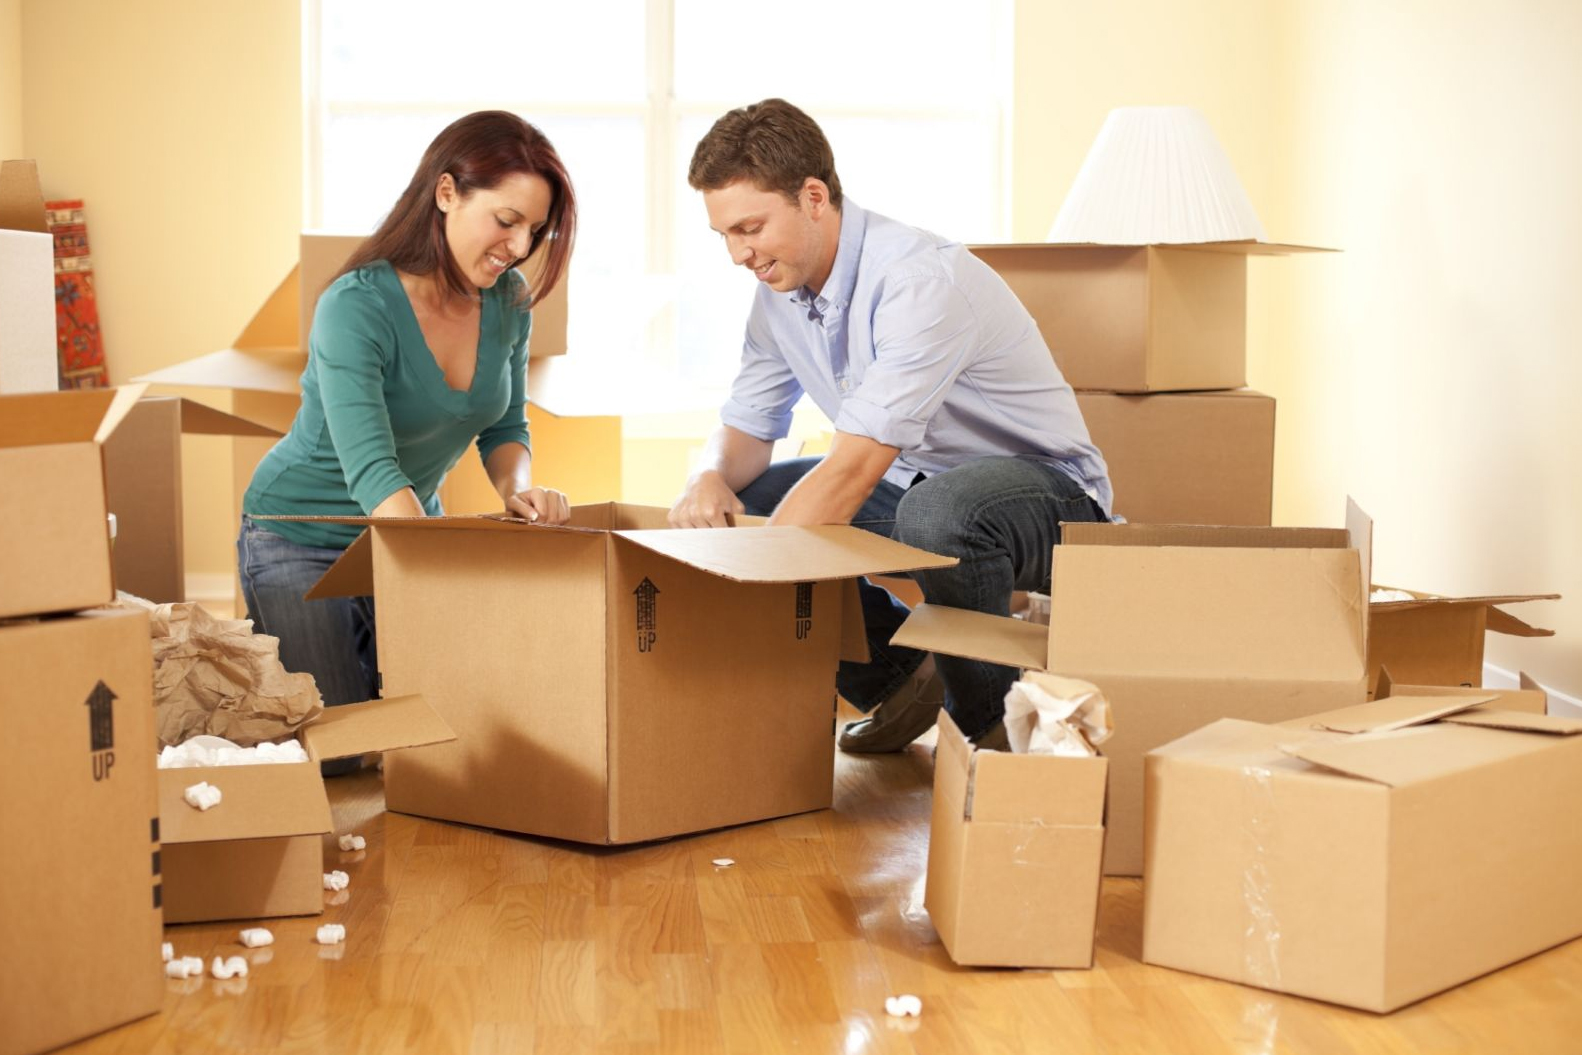 Lisbon, Removals, moving house, removals to Portugal, moving, moving house, moving